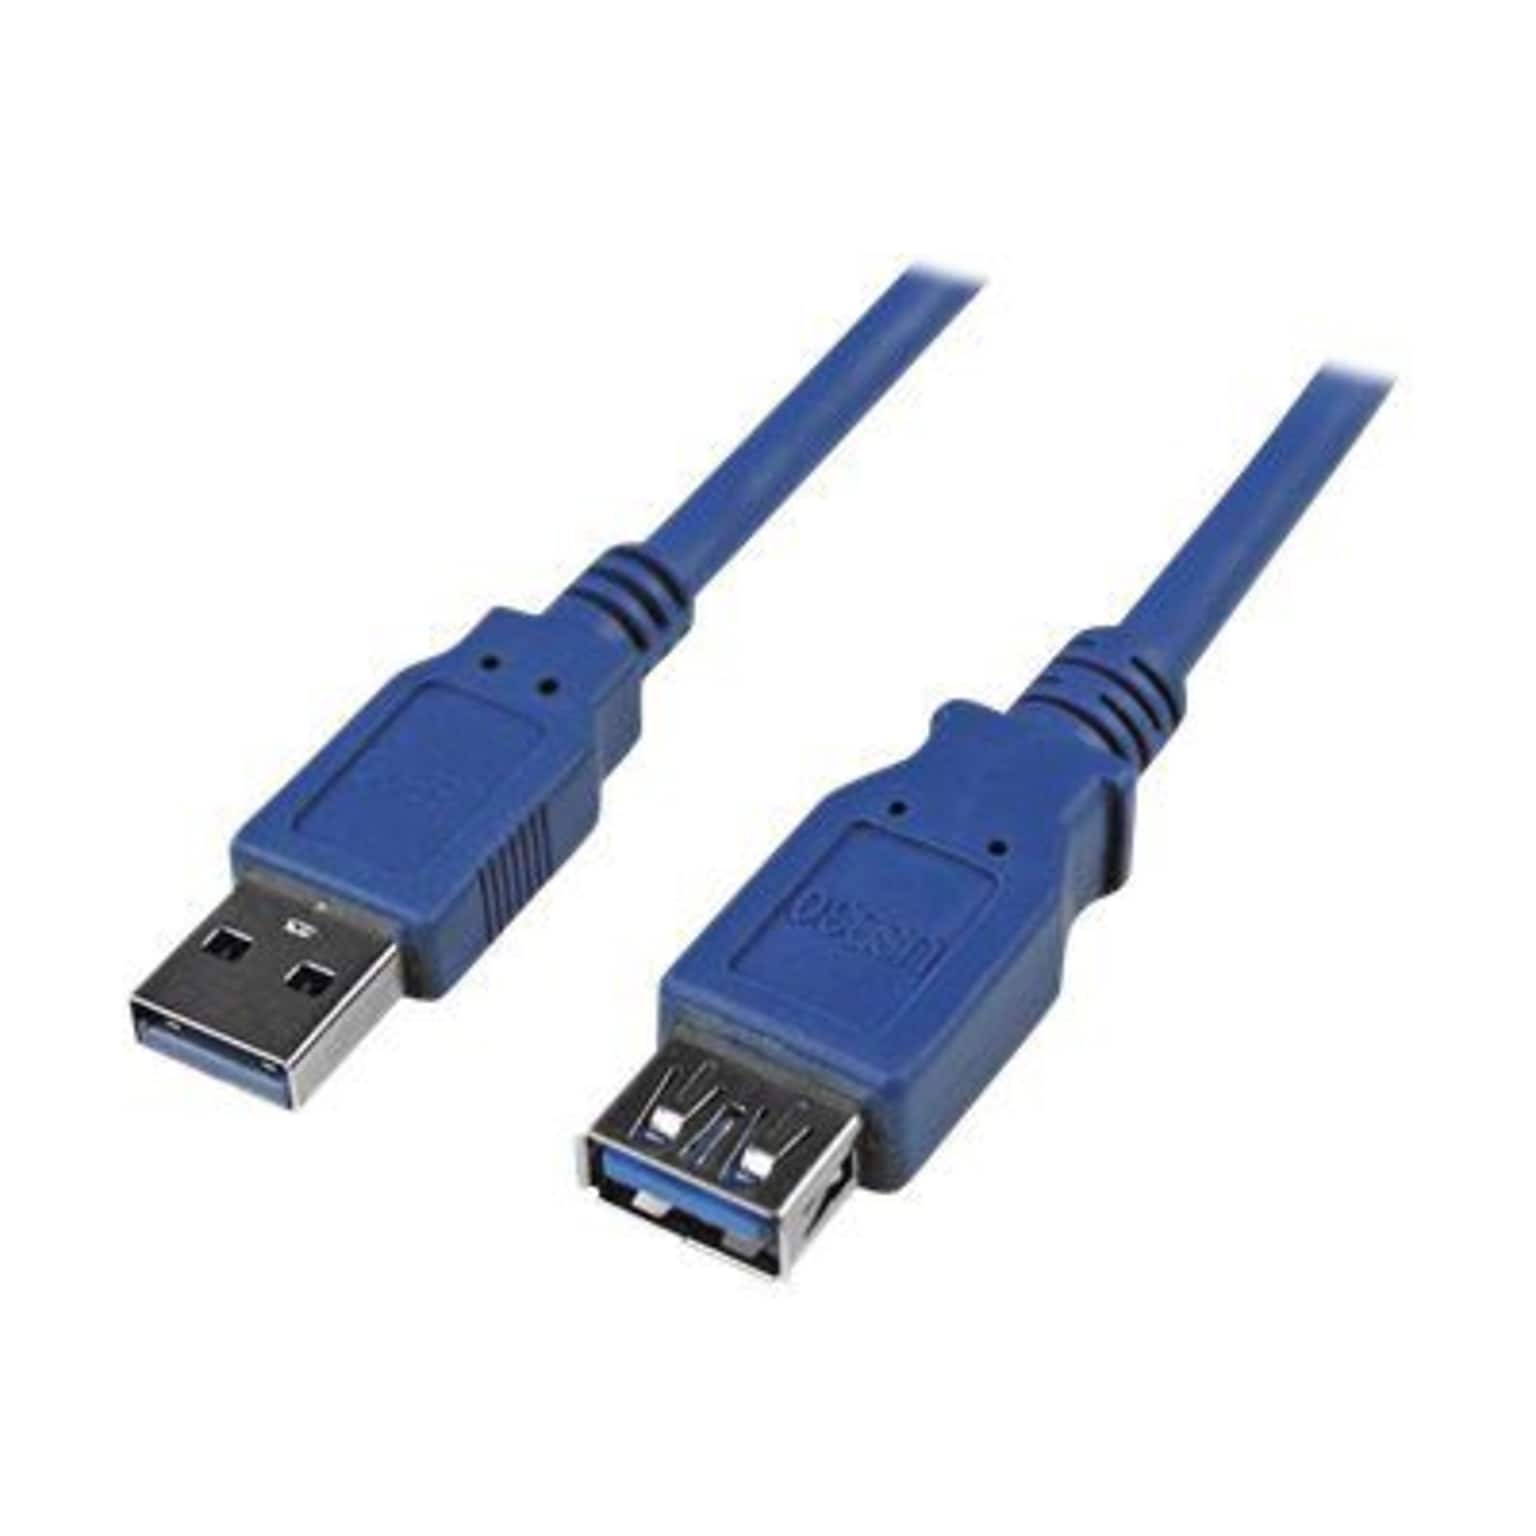 StarTech® 6 Superspeed USB 3.0 Type A Male To Type A Female Extension Cable; Blue